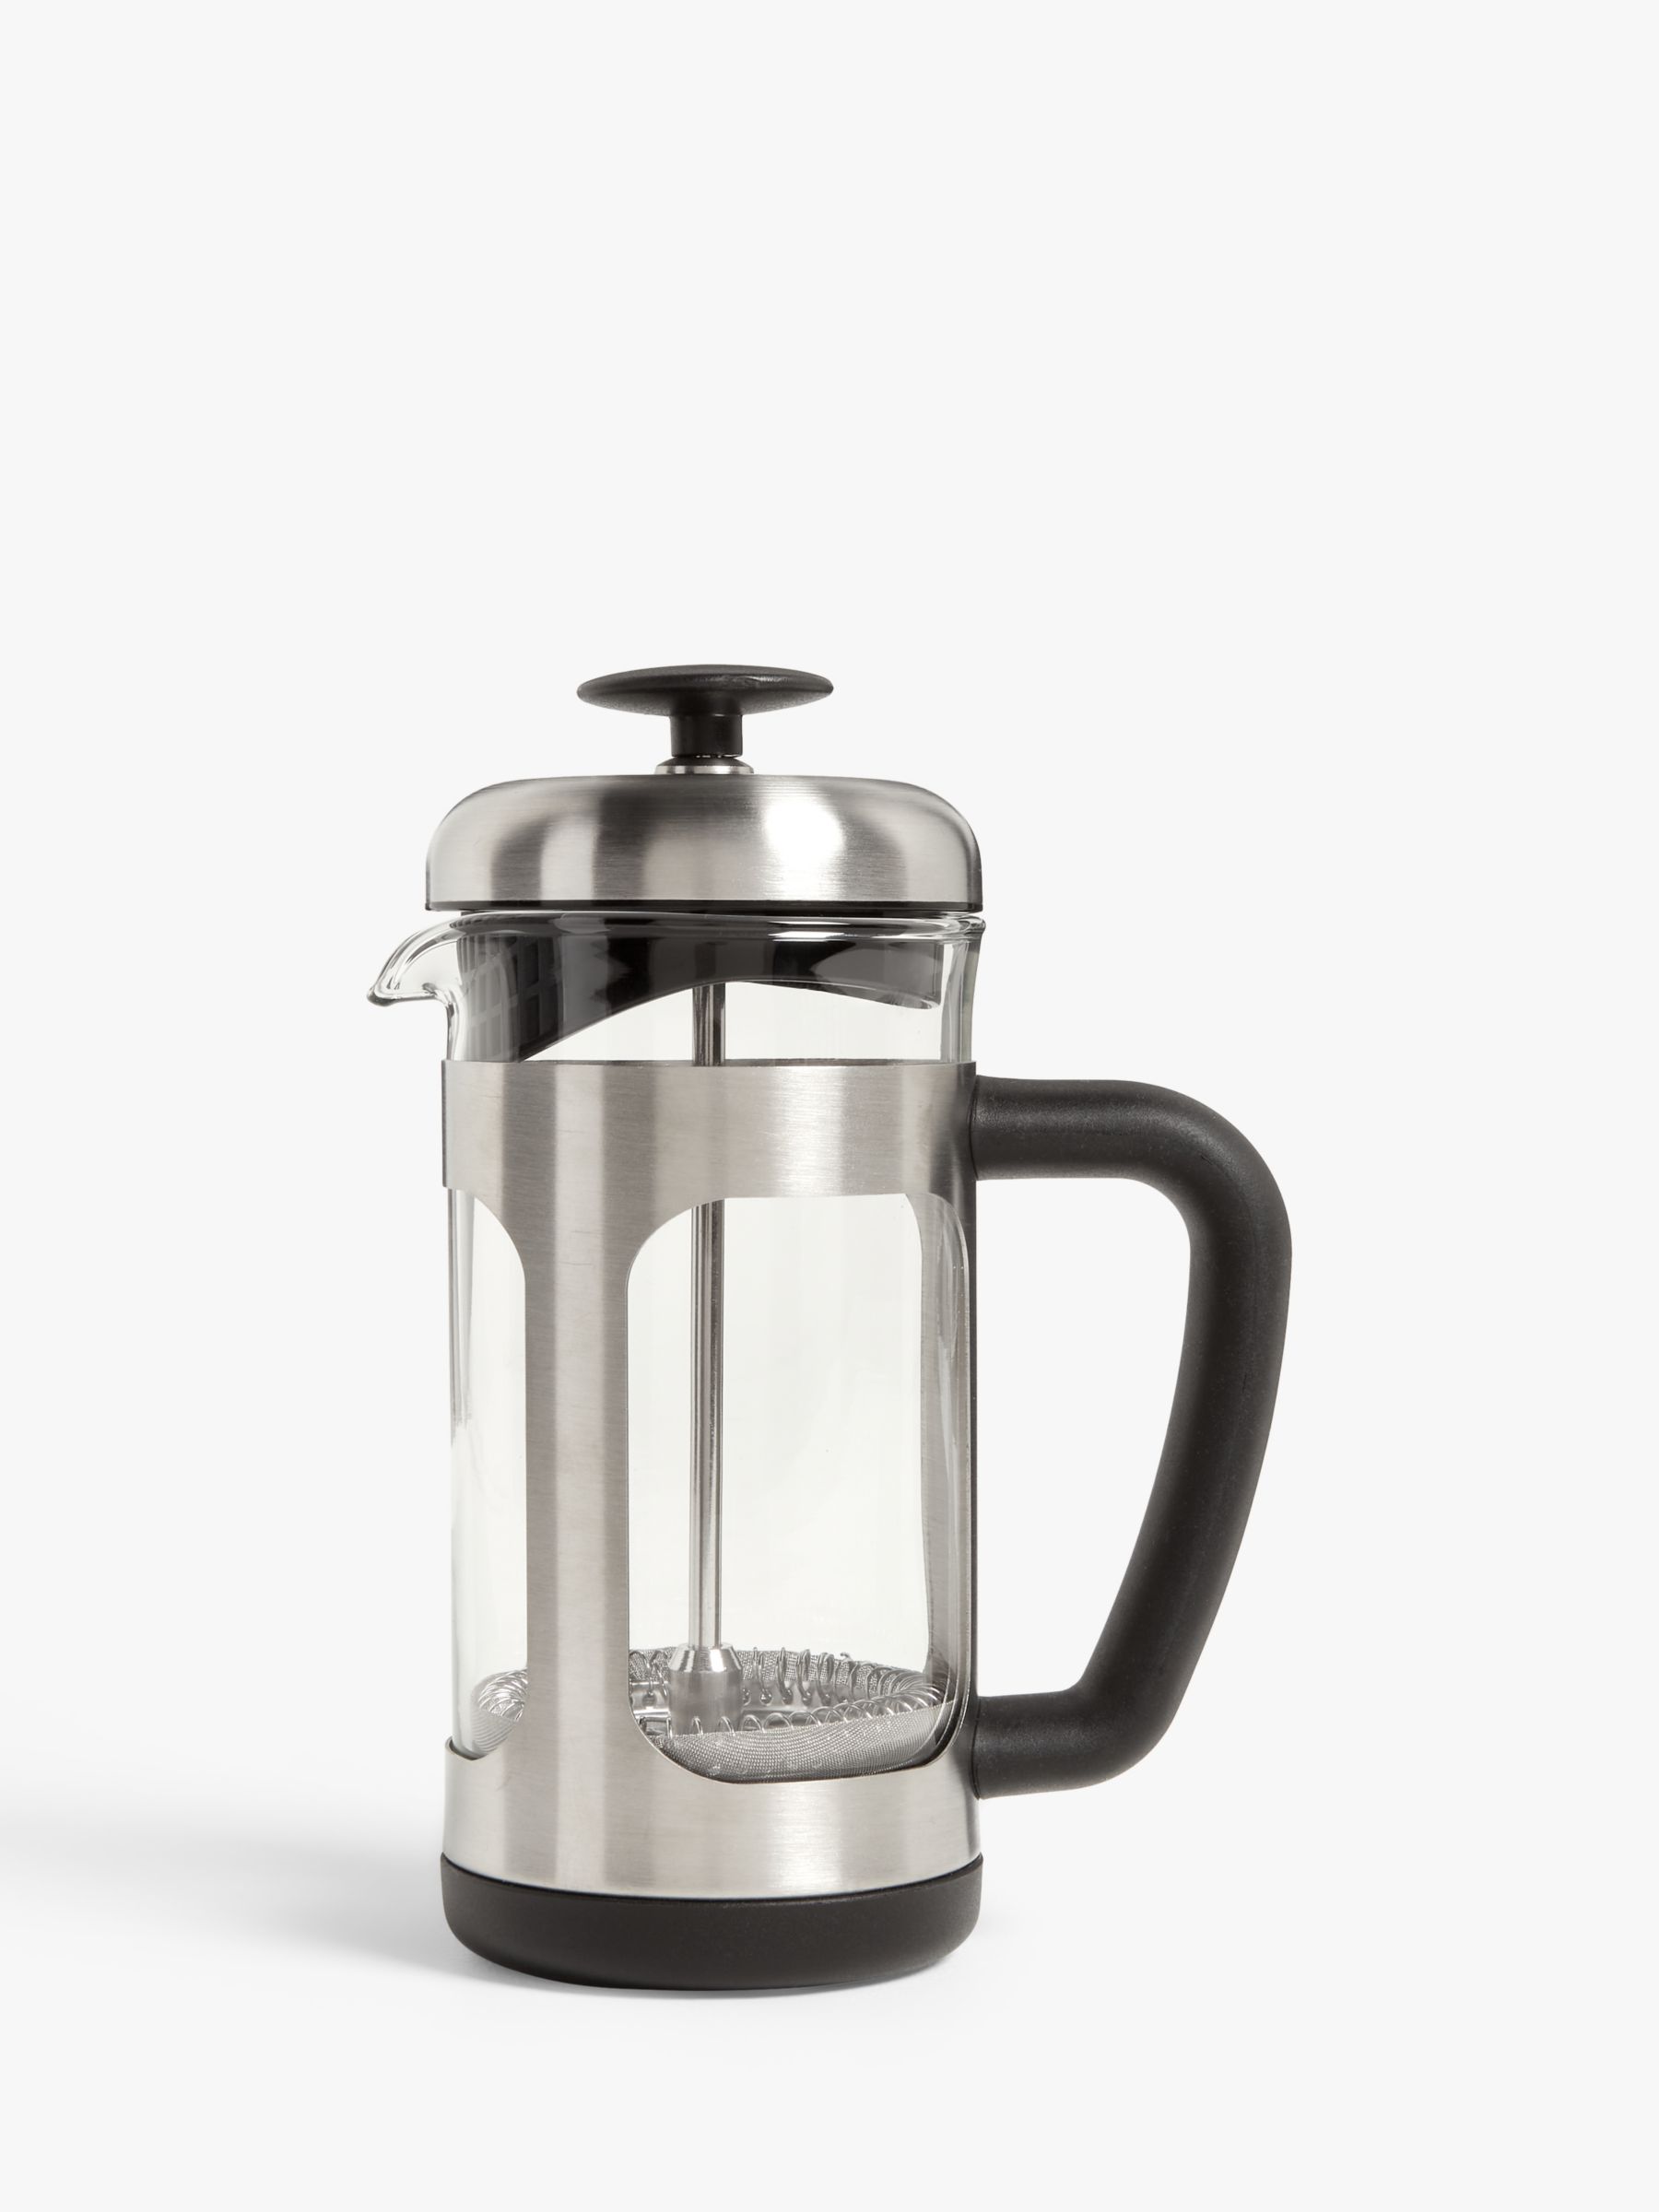 Bialetti Cafetiere Spare Glass, Transparent, 350 ml 3 Cup